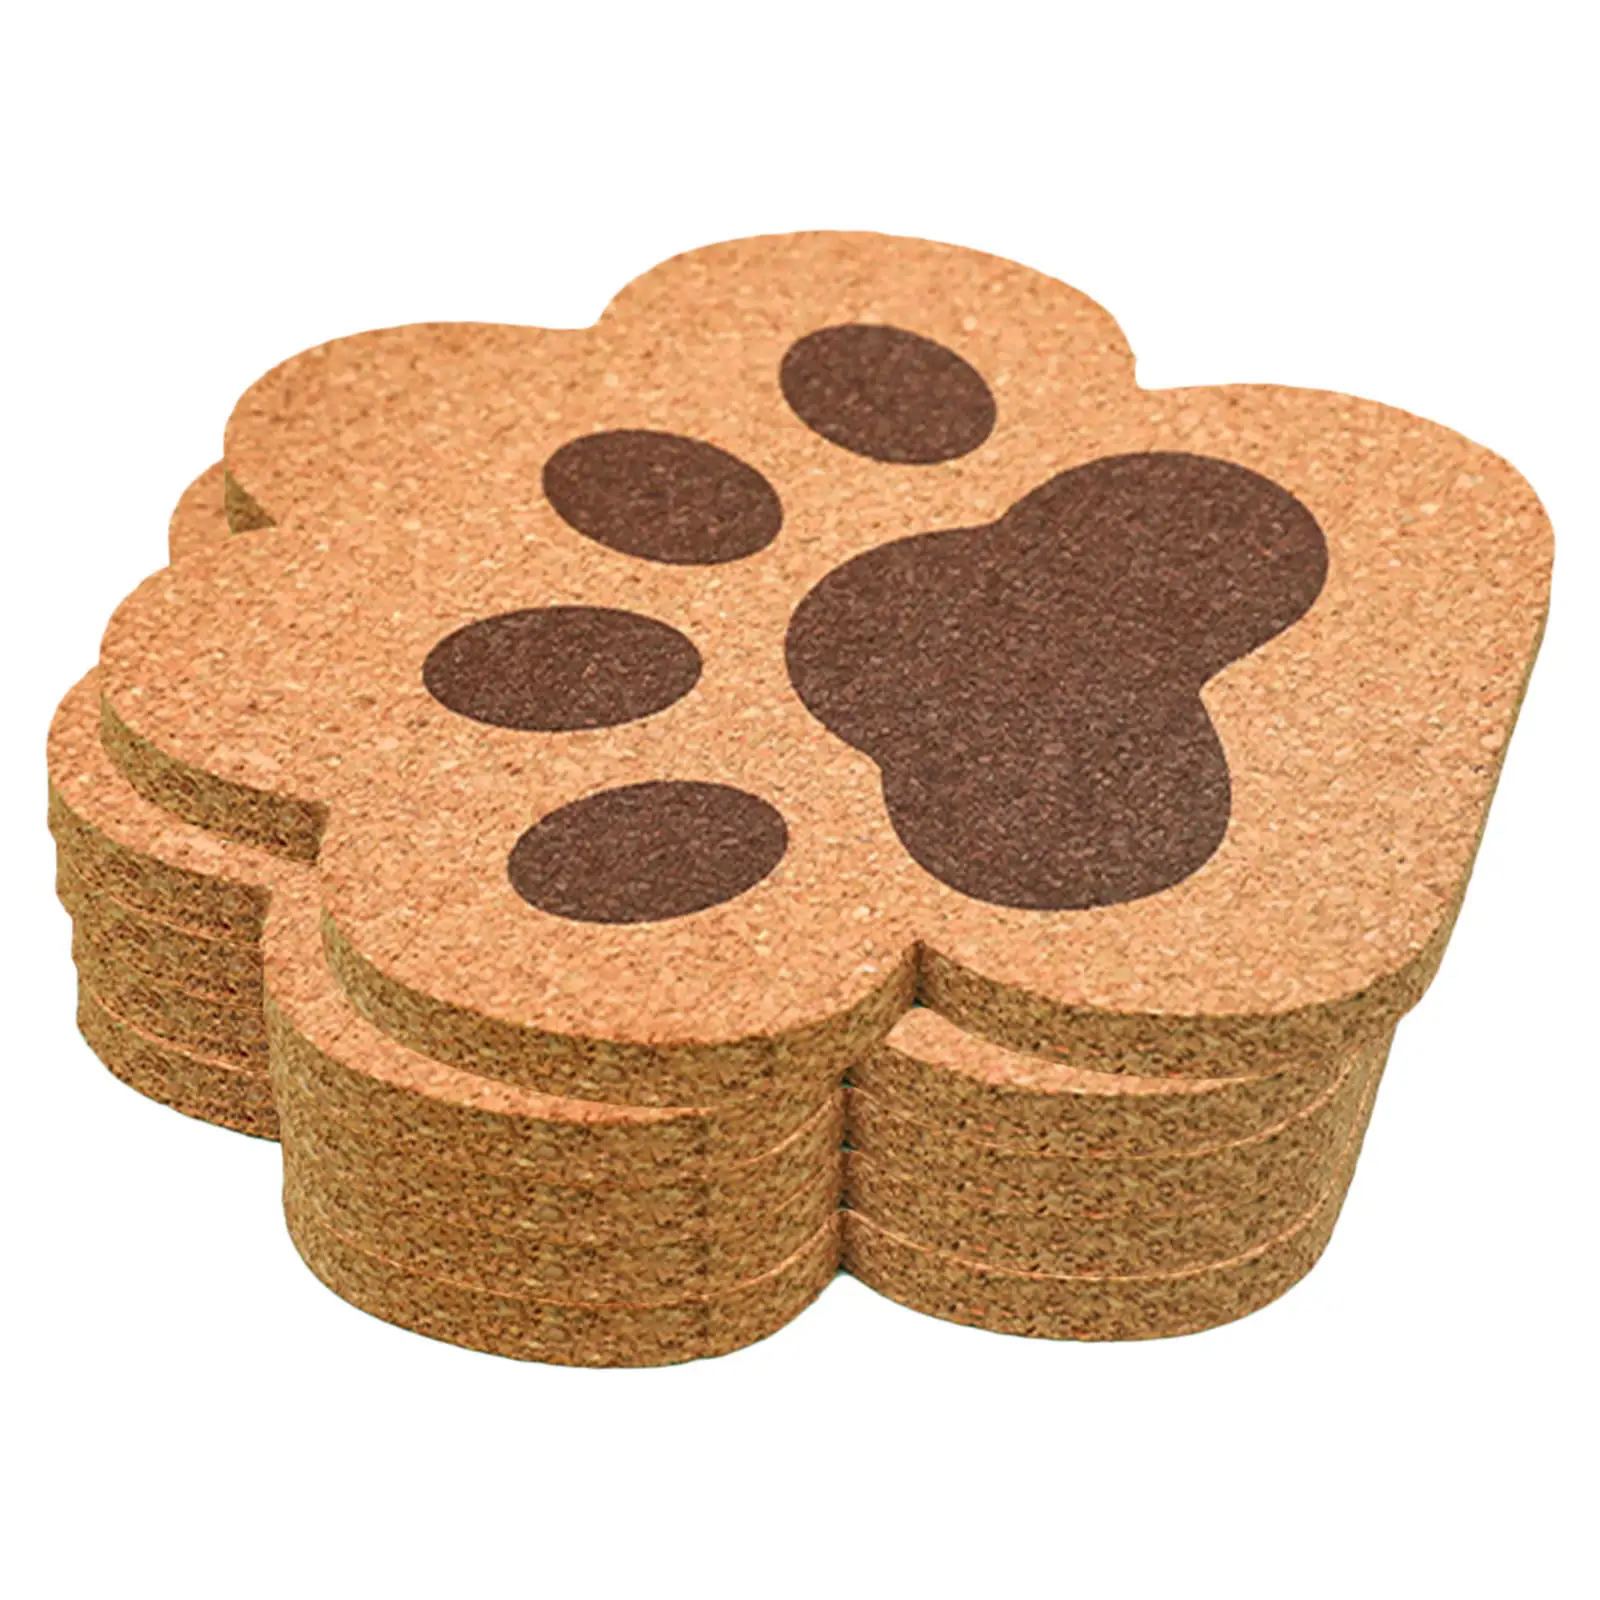 Set of 5 Cork Coaster Cat Paw 5 inch Heat Resistant Tea Mat for Home Idea Gift Wine Beer Glass